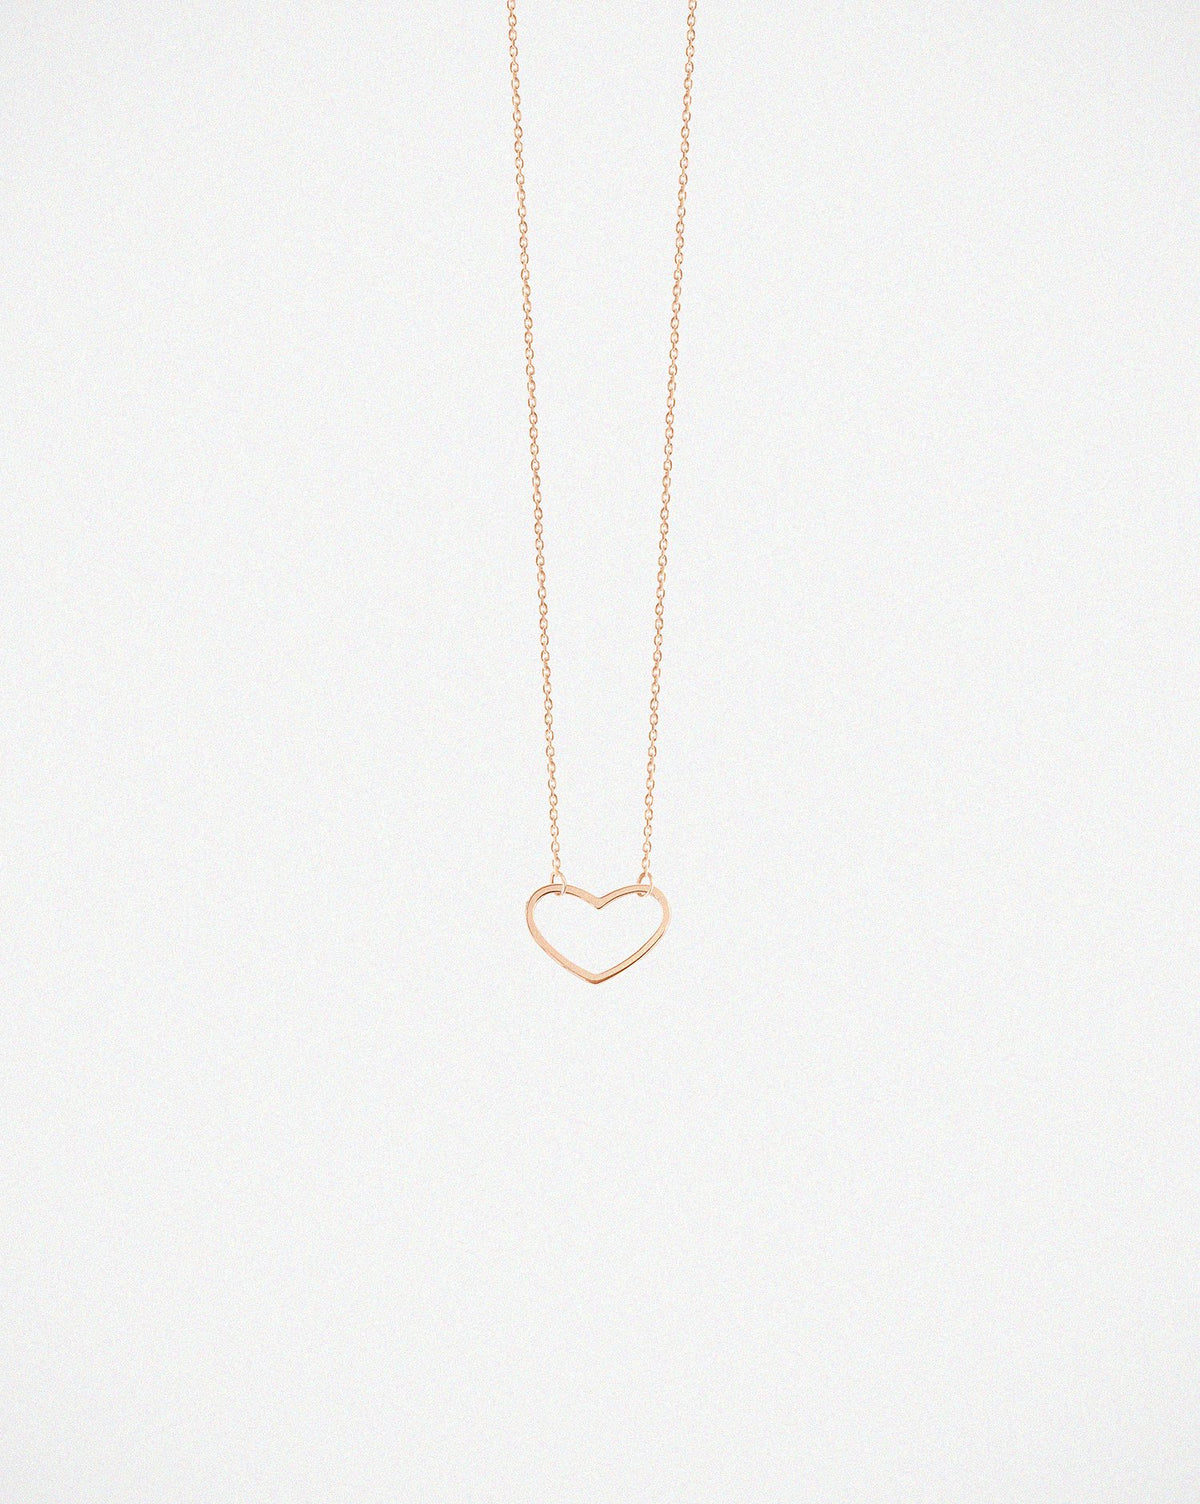 Angie 18K ROSE GOLD HEART NECKLACE